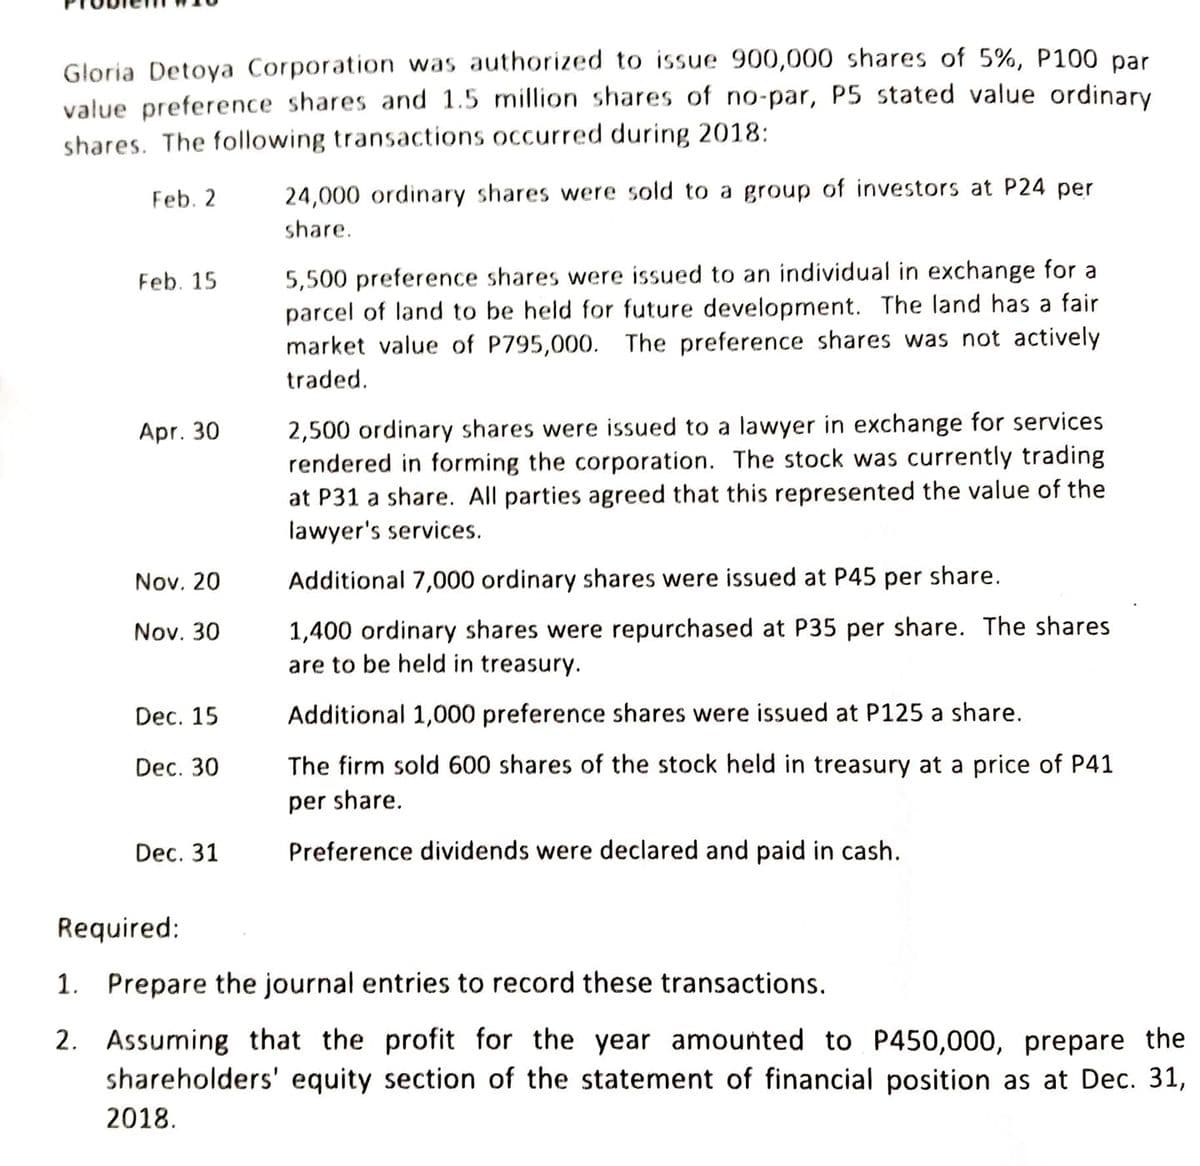 Gloria Detoya Corporation was authorized to issue 900,000 shares of 5%, P100 par
value preference shares and 1.5 million shares of no-par, P5 stated value ordinary
shares. The following transactions occurred during 2018:
Feb. 2
24,000 ordinary shares were sold to a group of investors at P24 per
share.
5,500 preference shares were issued to an individual in exchange for a
parcel of land to be held for future development. The land has a fair
market value of P795,000. The preference shares was not actively
Feb. 15
traded.
2,500 ordinary shares were issued to a lawyer in exchange for services
rendered in forming the corporation. The stock was currently trading
at P31 a share. All parties agreed that this represented the value of the
lawyer's services.
Apr. 30
Nov. 20
Additional 7,000 ordinary shares were issued at P45 per share.
1,400 ordinary shares were repurchased at P35 per share. The shares
are to be held in treasury.
Nov. 30
Dec. 15
Additional 1,000 preference shares were issued at P125 a share.
Dec. 30
The firm sold 600 shares of the stock held in treasury at a price of P41
per share.
Dec. 31
Preference dividends were declared and paid in cash.
Required:
1. Prepare the journal entries to record these transactions.
2. Assuming that the profit for the year amounted to P450,000, prepare the
shareholders' equity section of the statement of financial position as at Dec. 31,
2018.
